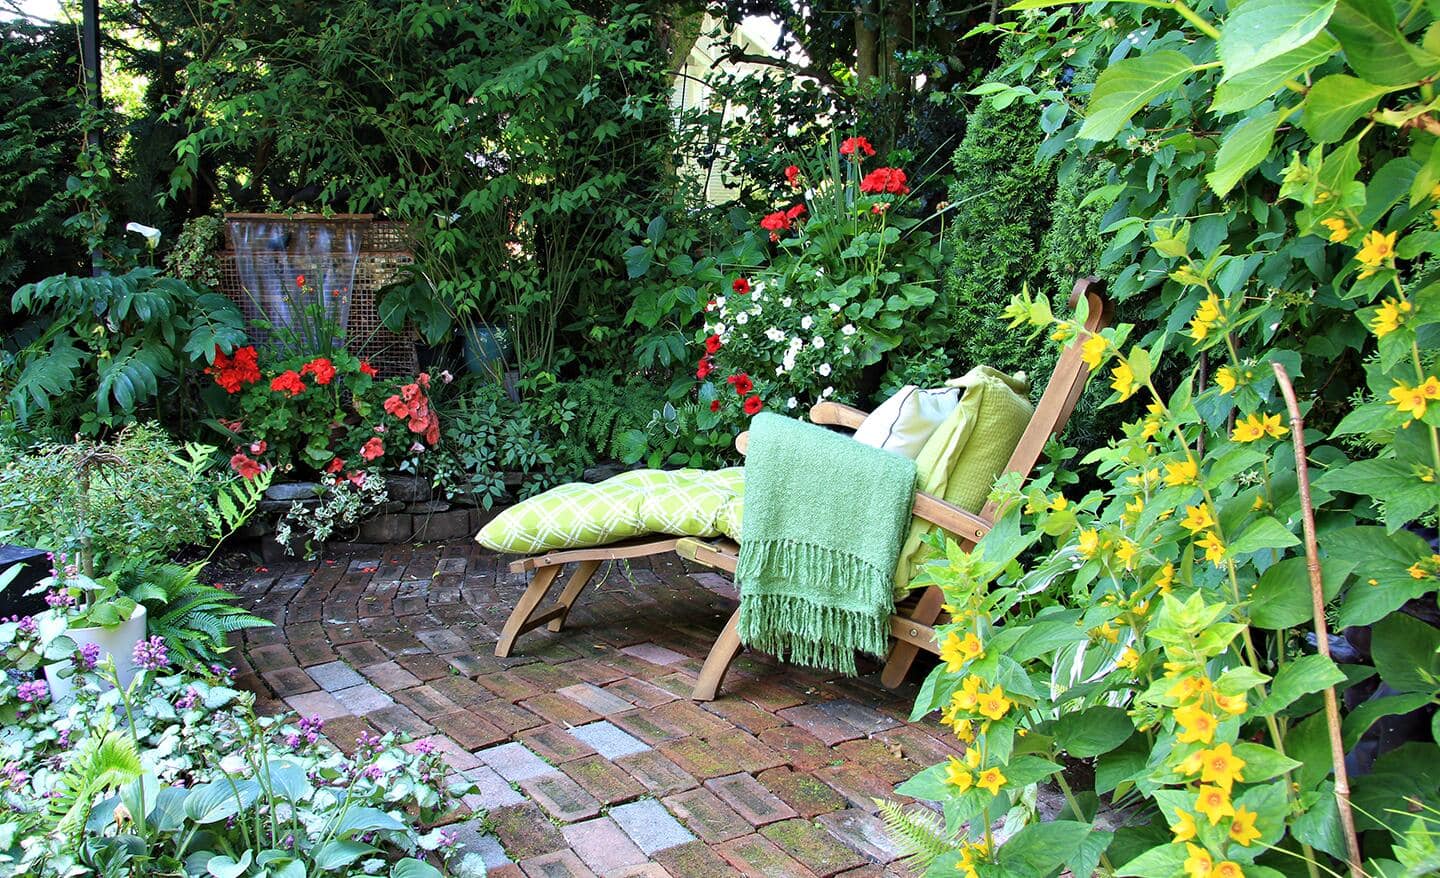 A chaise lounge chair on a patio surrounded by garden plants and flowers